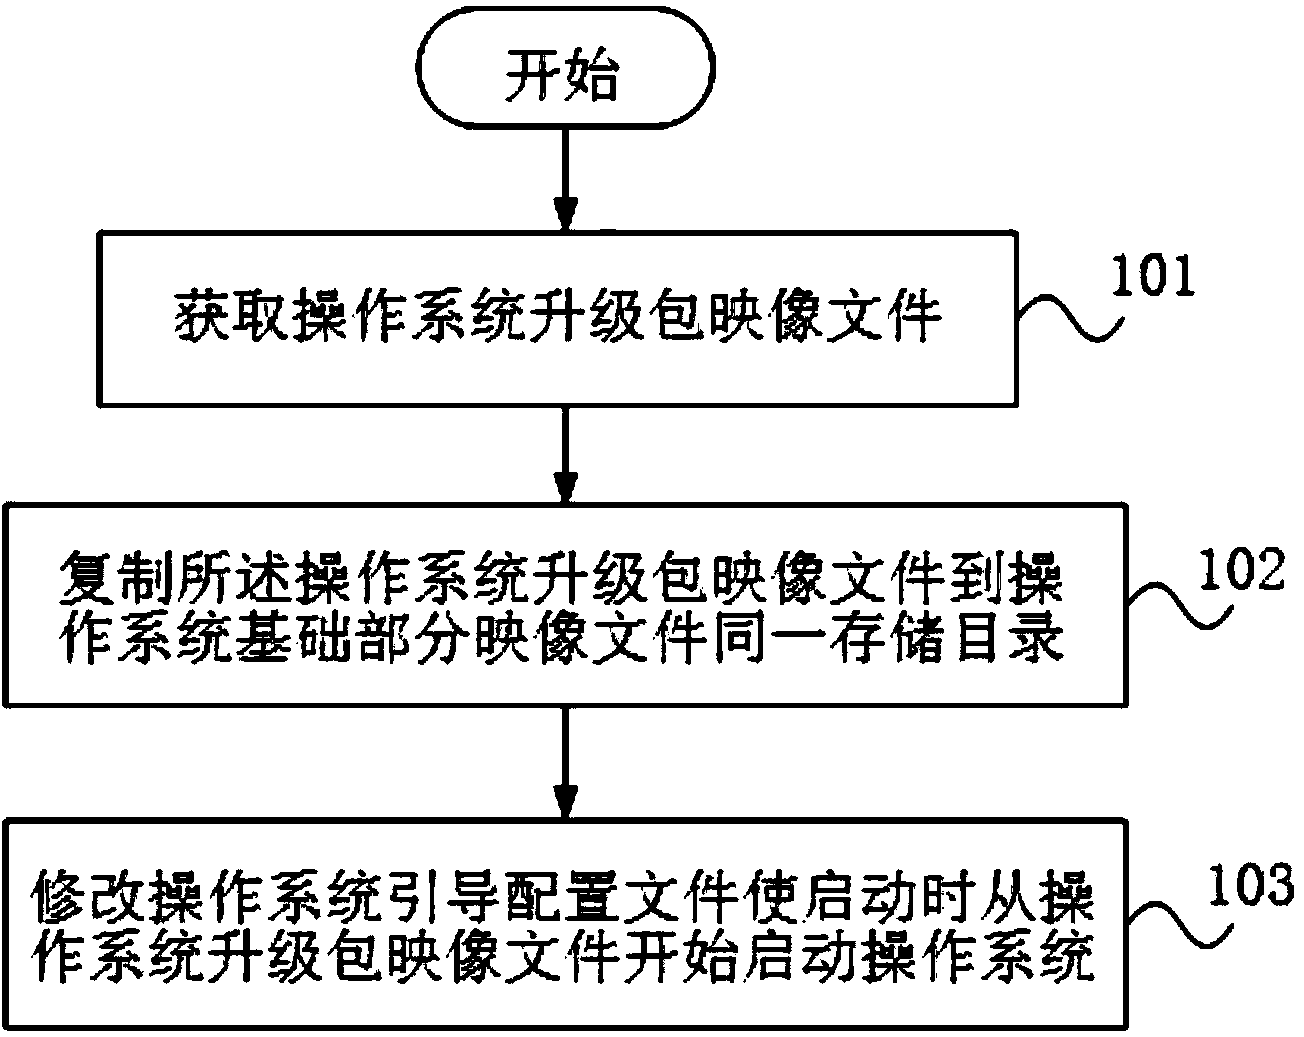 Method and device for upgrading unix-like operating system